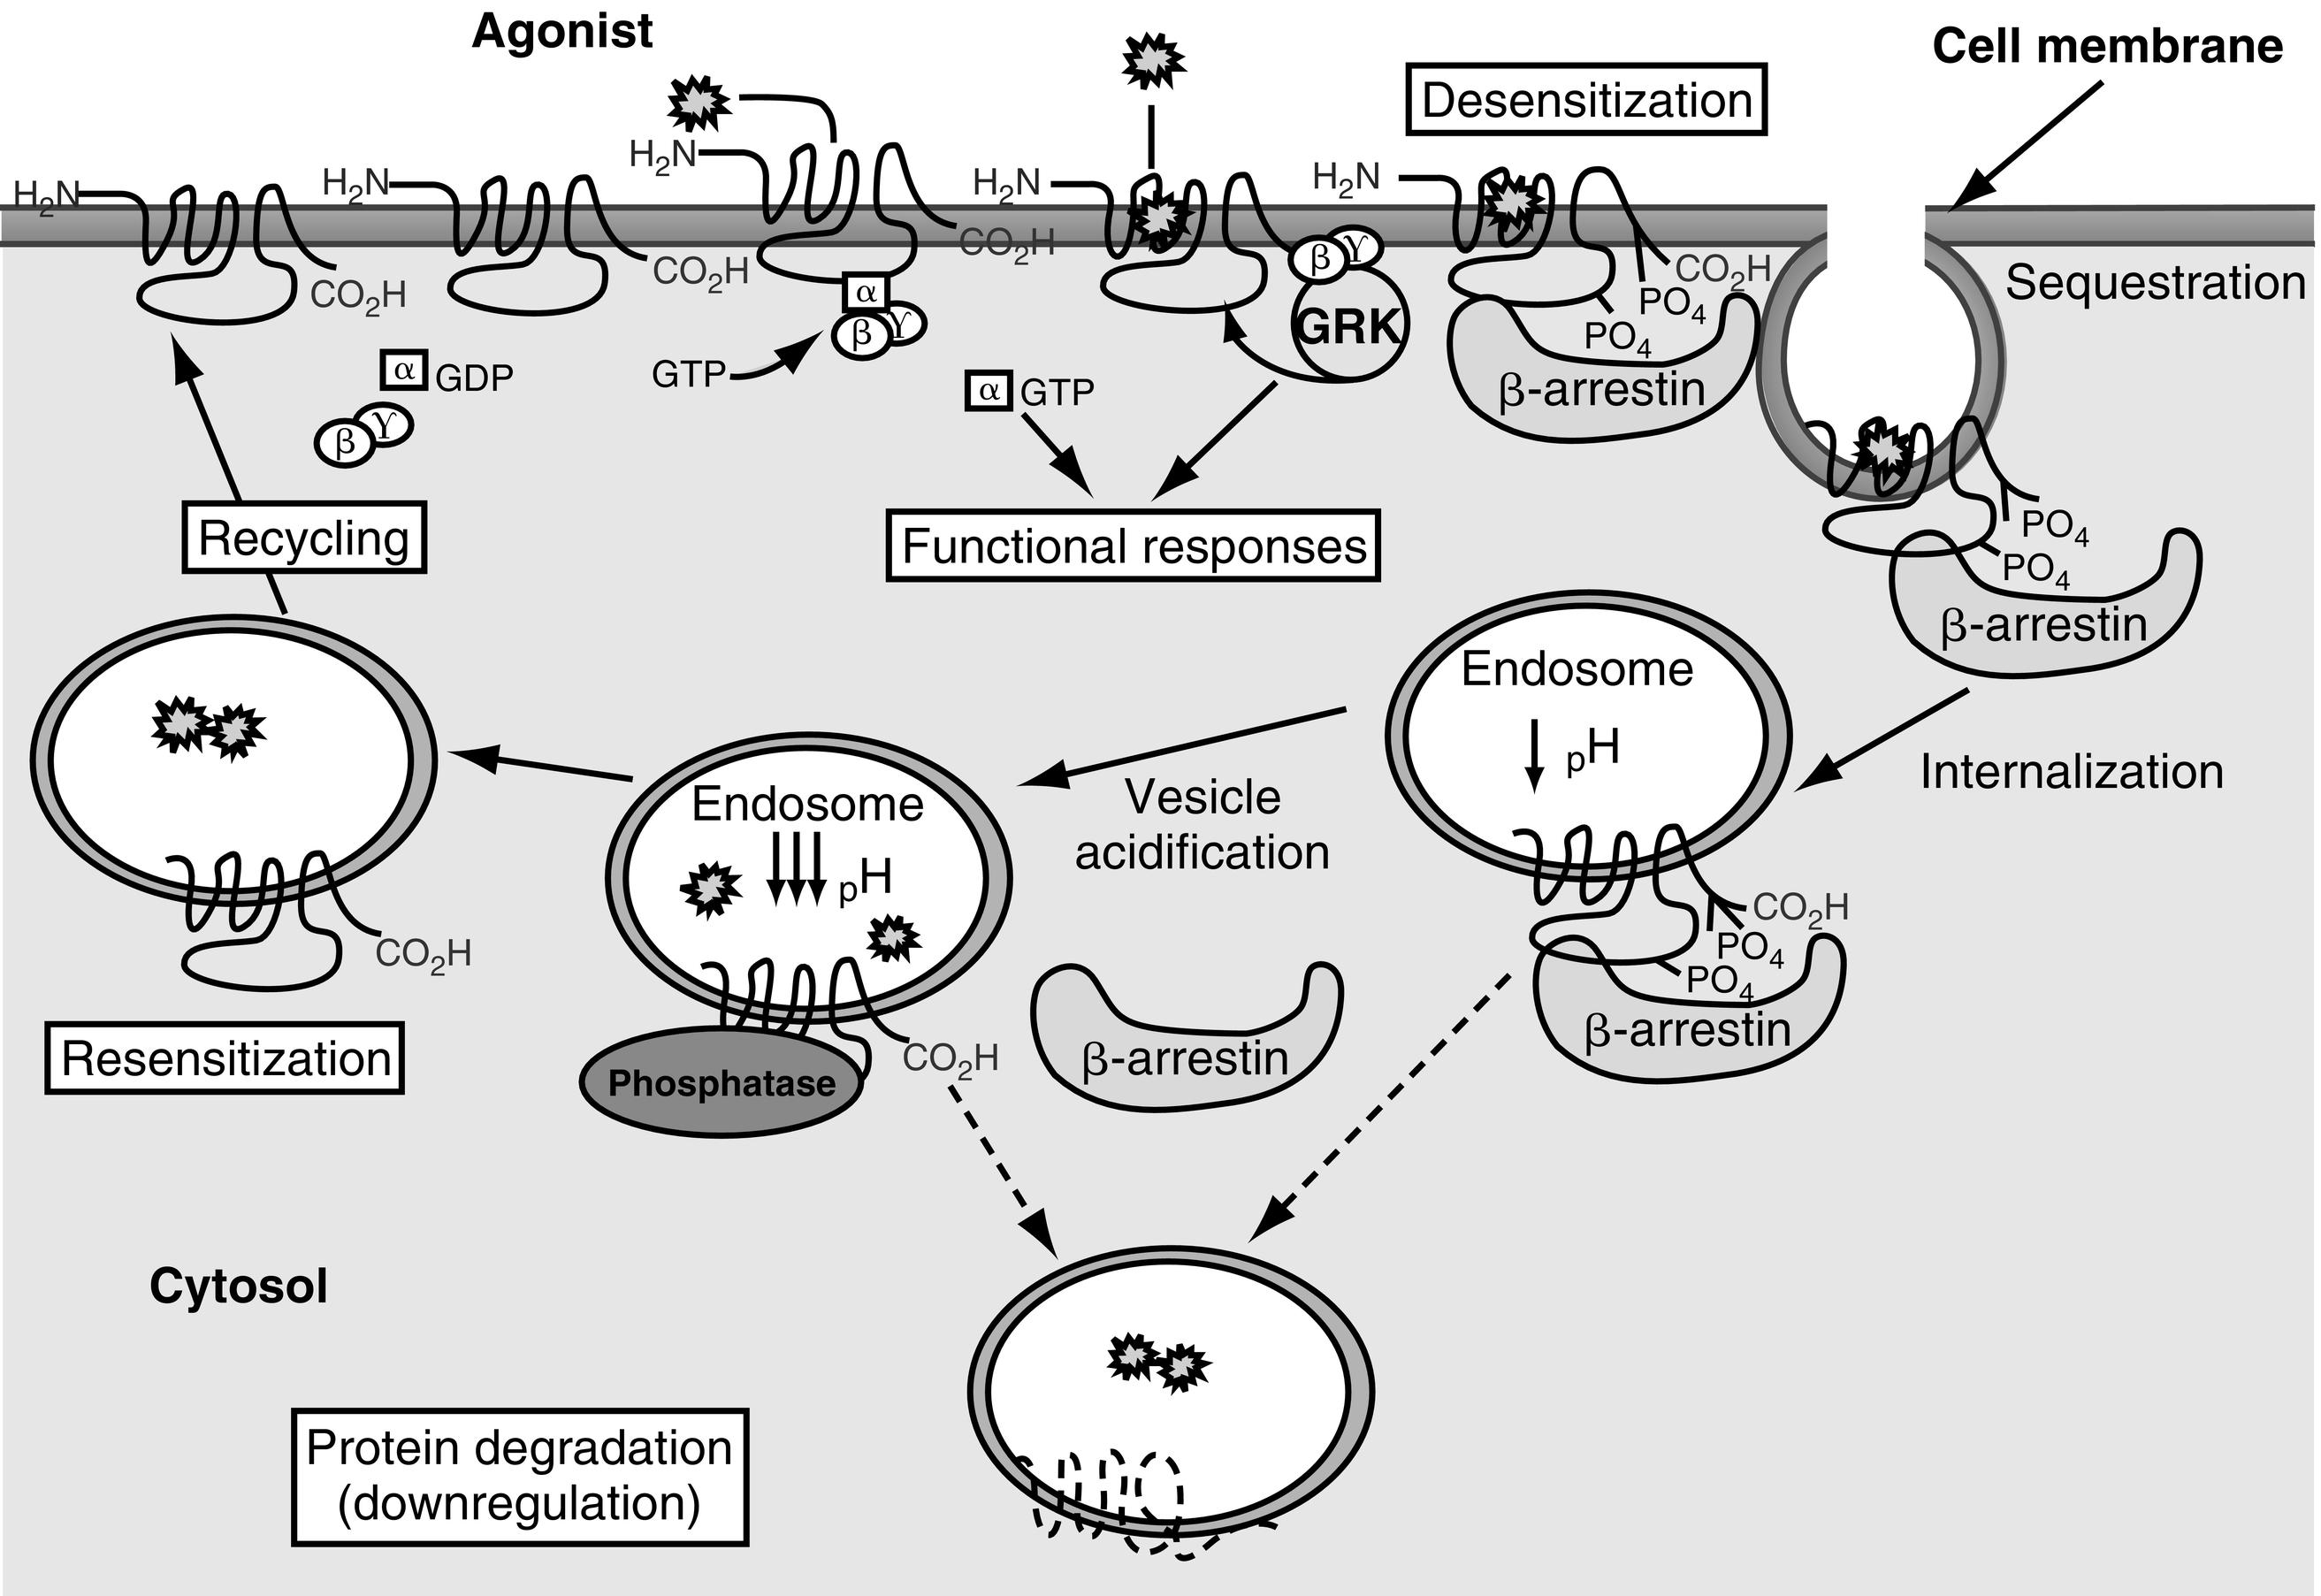 Fig. 3.2, Desensitization and recycling of G protein–coupled receptors (GPCRs). Shortly after an agonist binds a GPCR, G protein receptor kinases phosphorylation of serine and threonine residues in the third intracellular loop or the carboxy-terminal intracellular domain leads to activation of β-arrestin. Activation of β-arrestin inactivates adenylyl cyclase and initiates sequestration of the GPCR in clathrin-coated vesicles. Dephosphorylation of the sequestered receptor and subsequent disassociation of the receptor from β-arrestin is followed by recycling of the GPCR to the cell membrane. Alternatively, once sequestered, the GPCR can be destroyed in lysosomes.